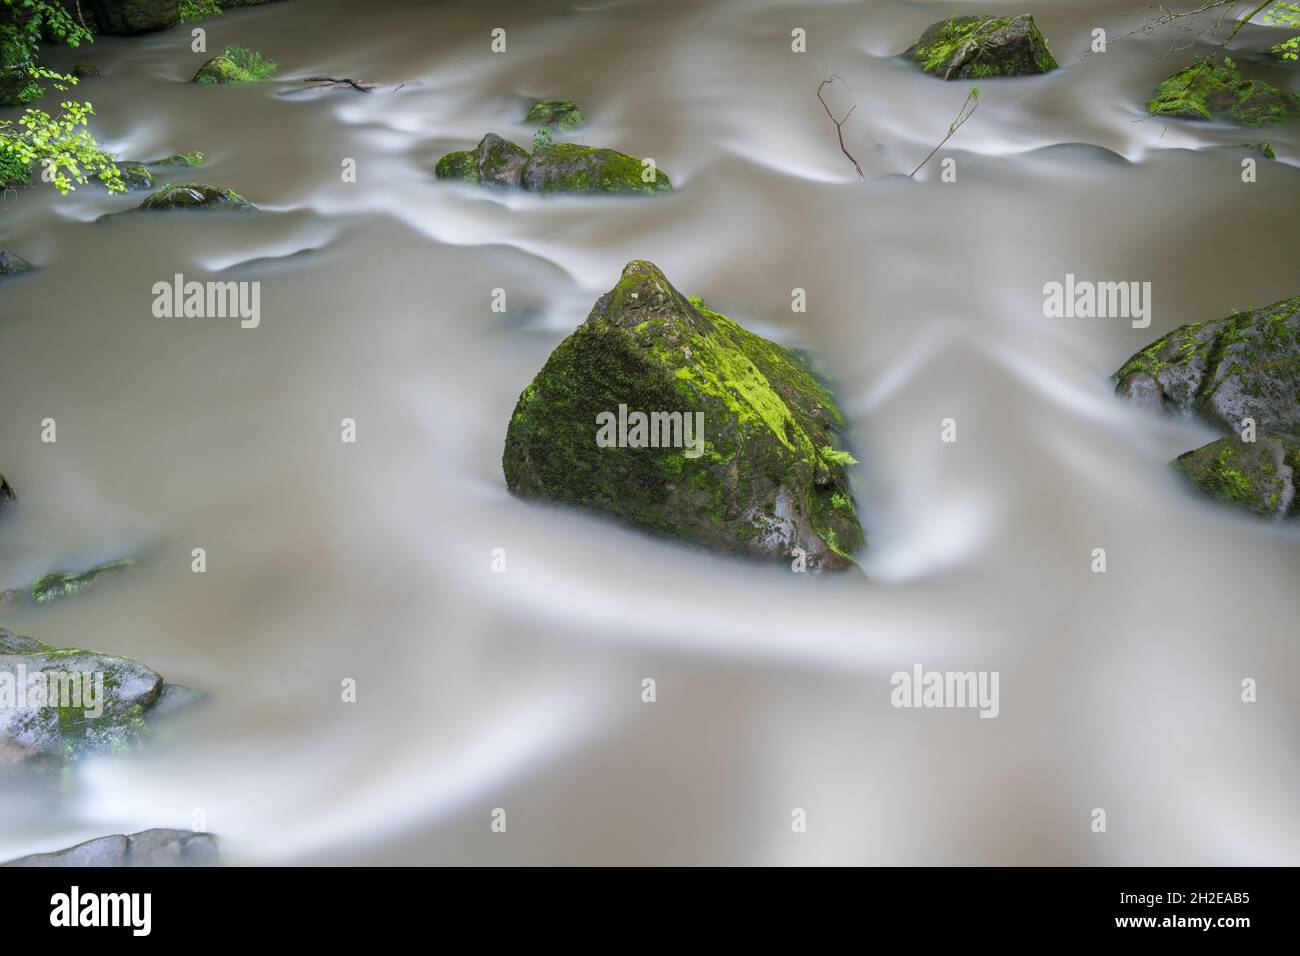 abstract image of a bright green rock in blurred flowing water Stock Photo